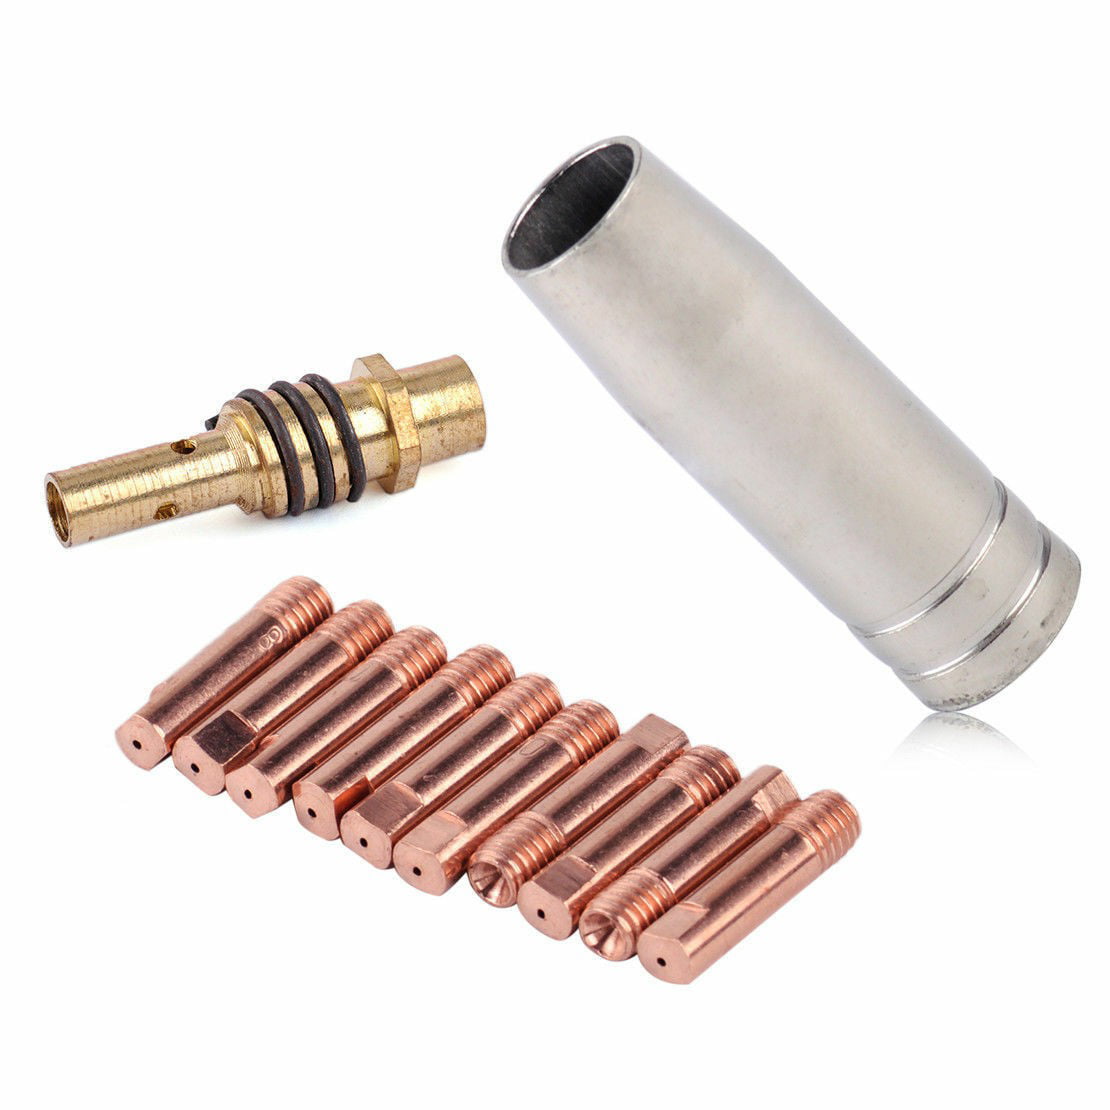 12pcs MB 15AK MIG/MAG Welding Torch Contact Tip 0.8 x 25mm M6 Gas Nozzle Shroud Holder Kit 